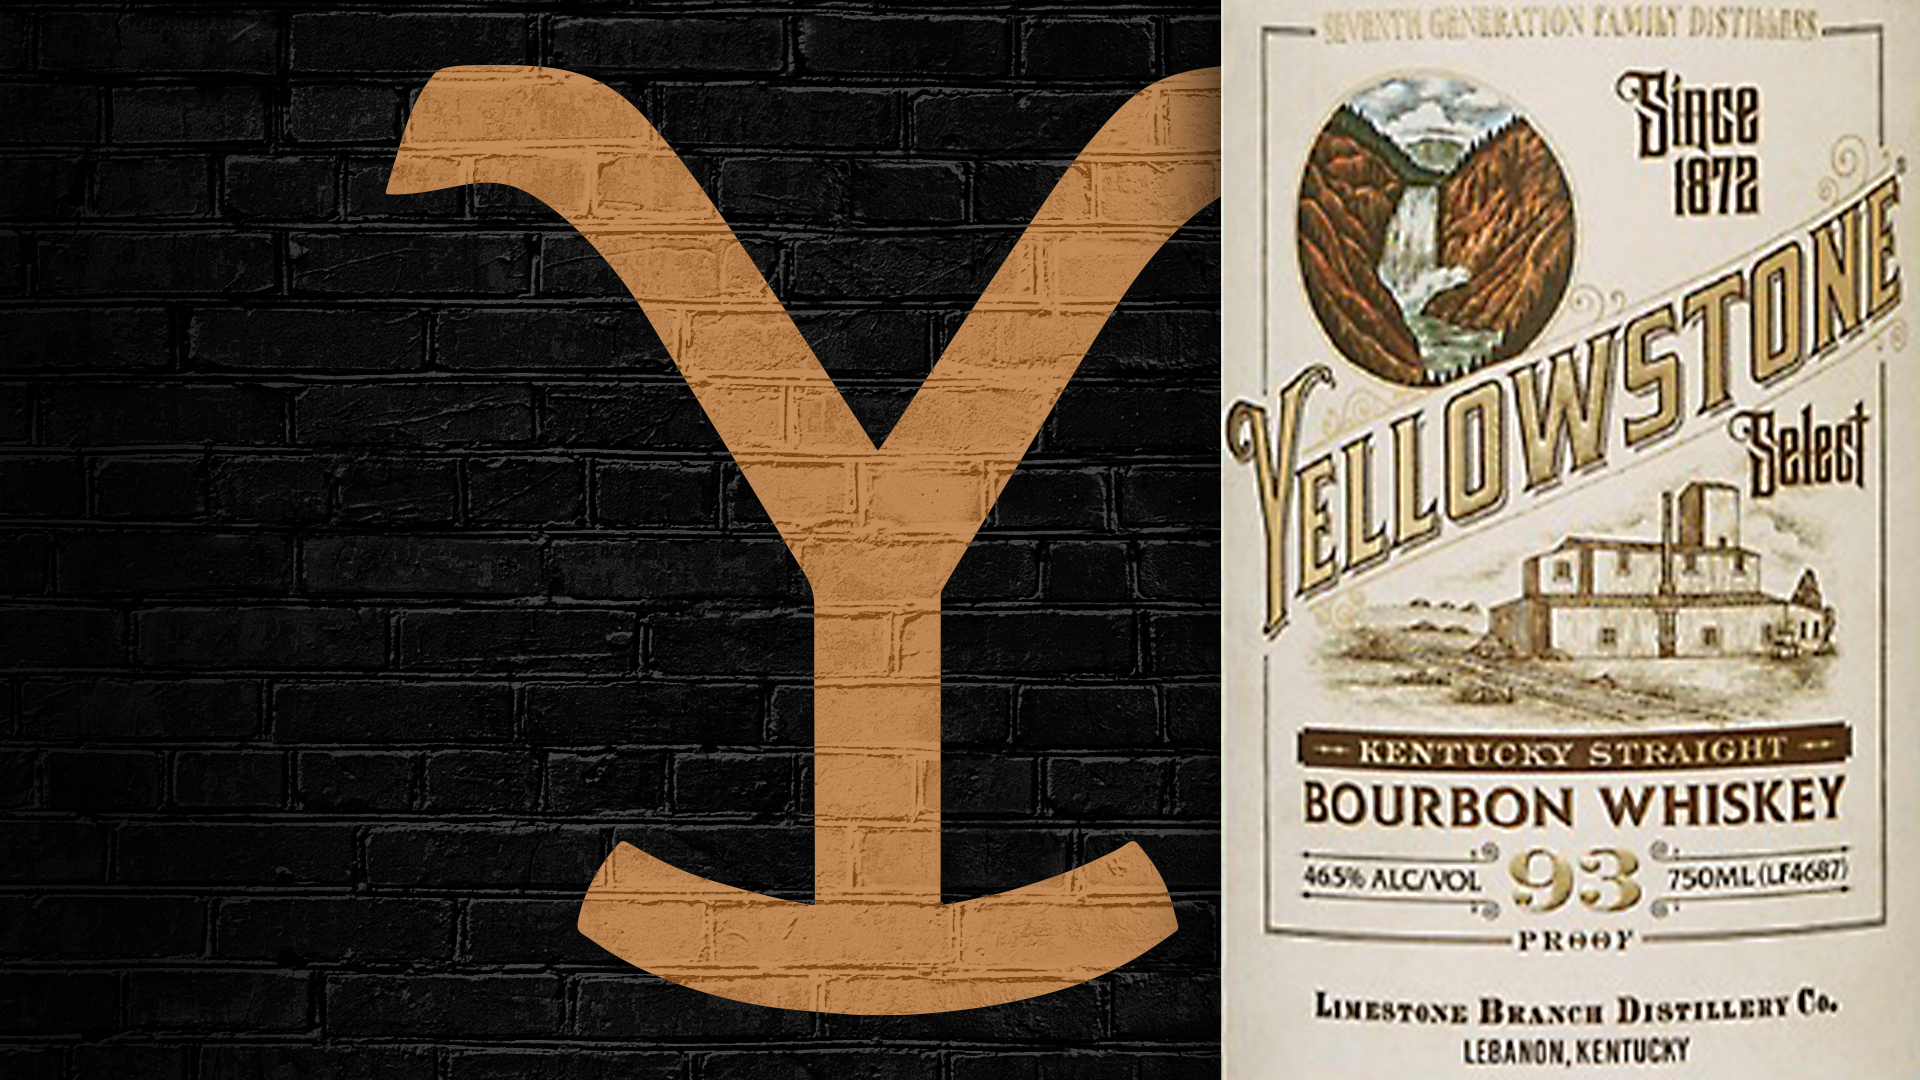 Meet the makers of Yellowstone bourbon at Frankie Martin's Garden